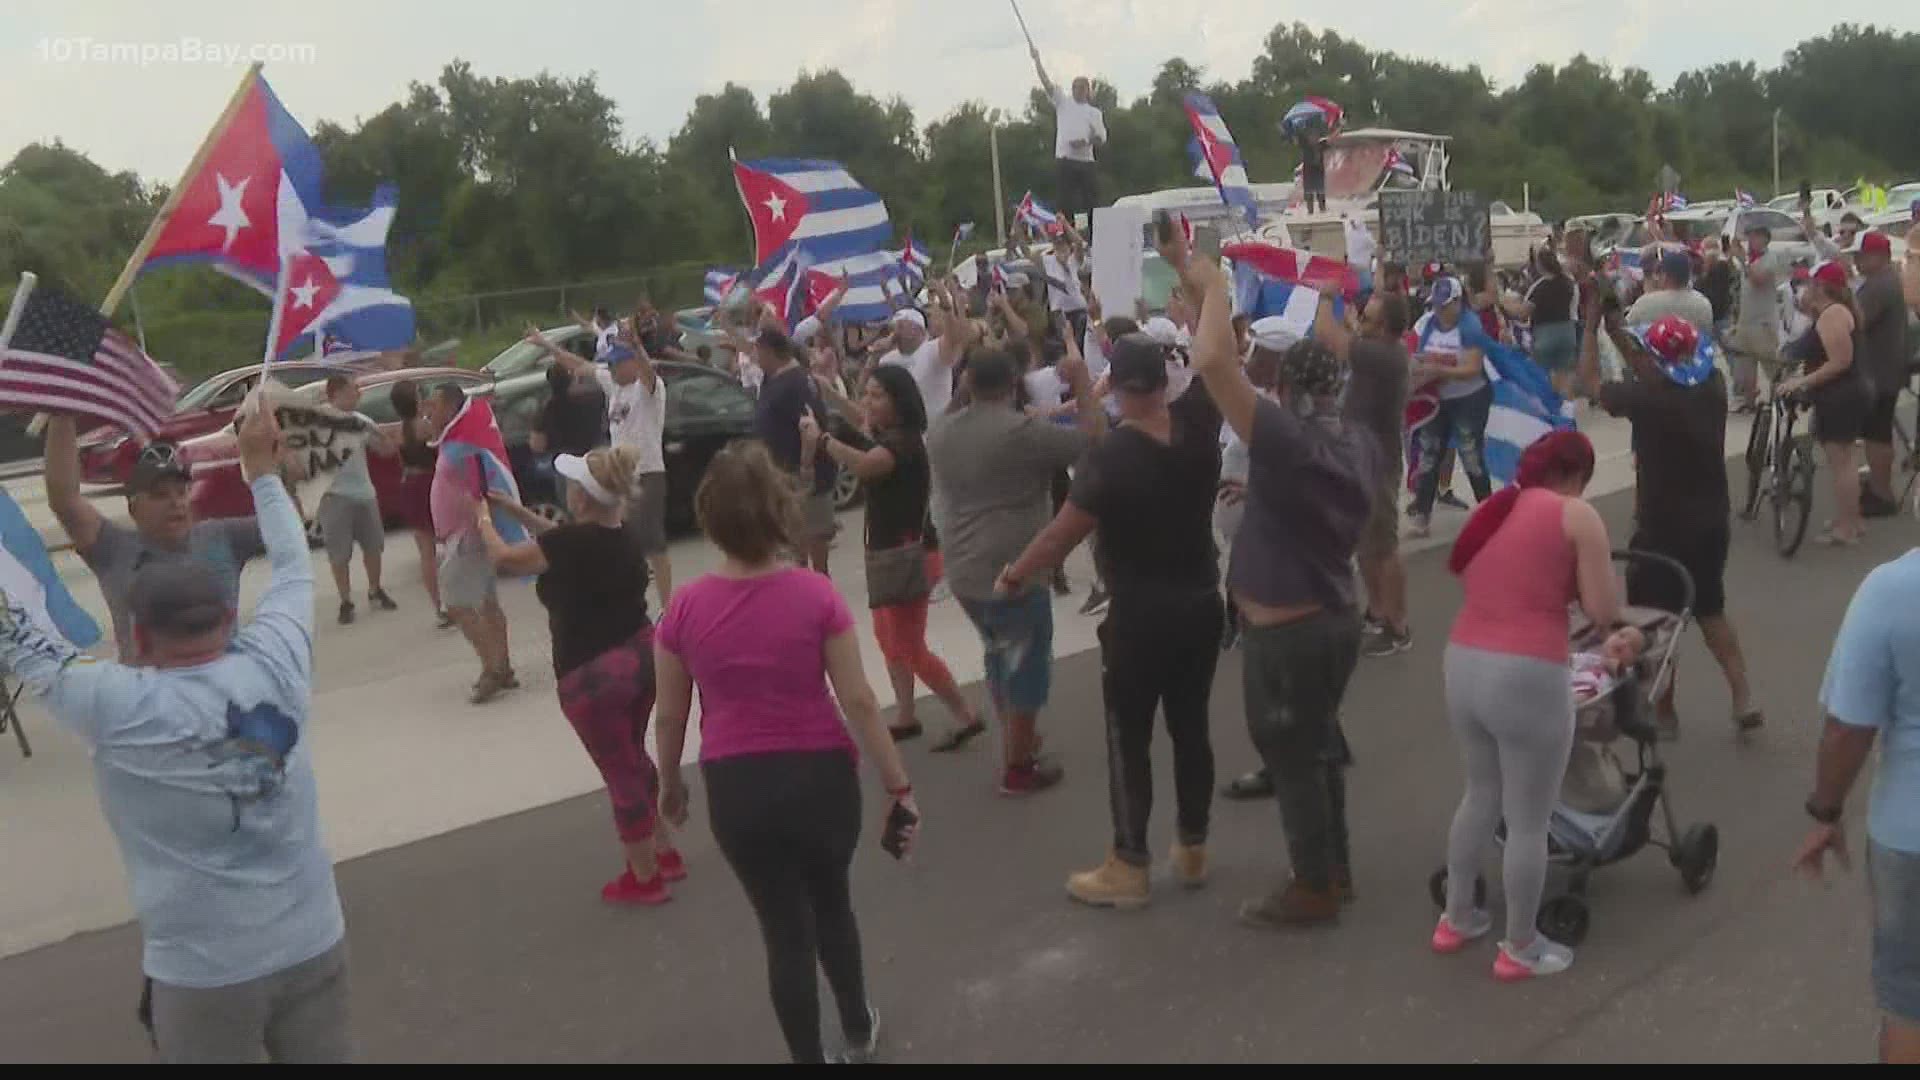 Demonstrators in support of the Cuban people marched along major roadways in Tampa and, at one point, attempted to get onto Interstate 275.